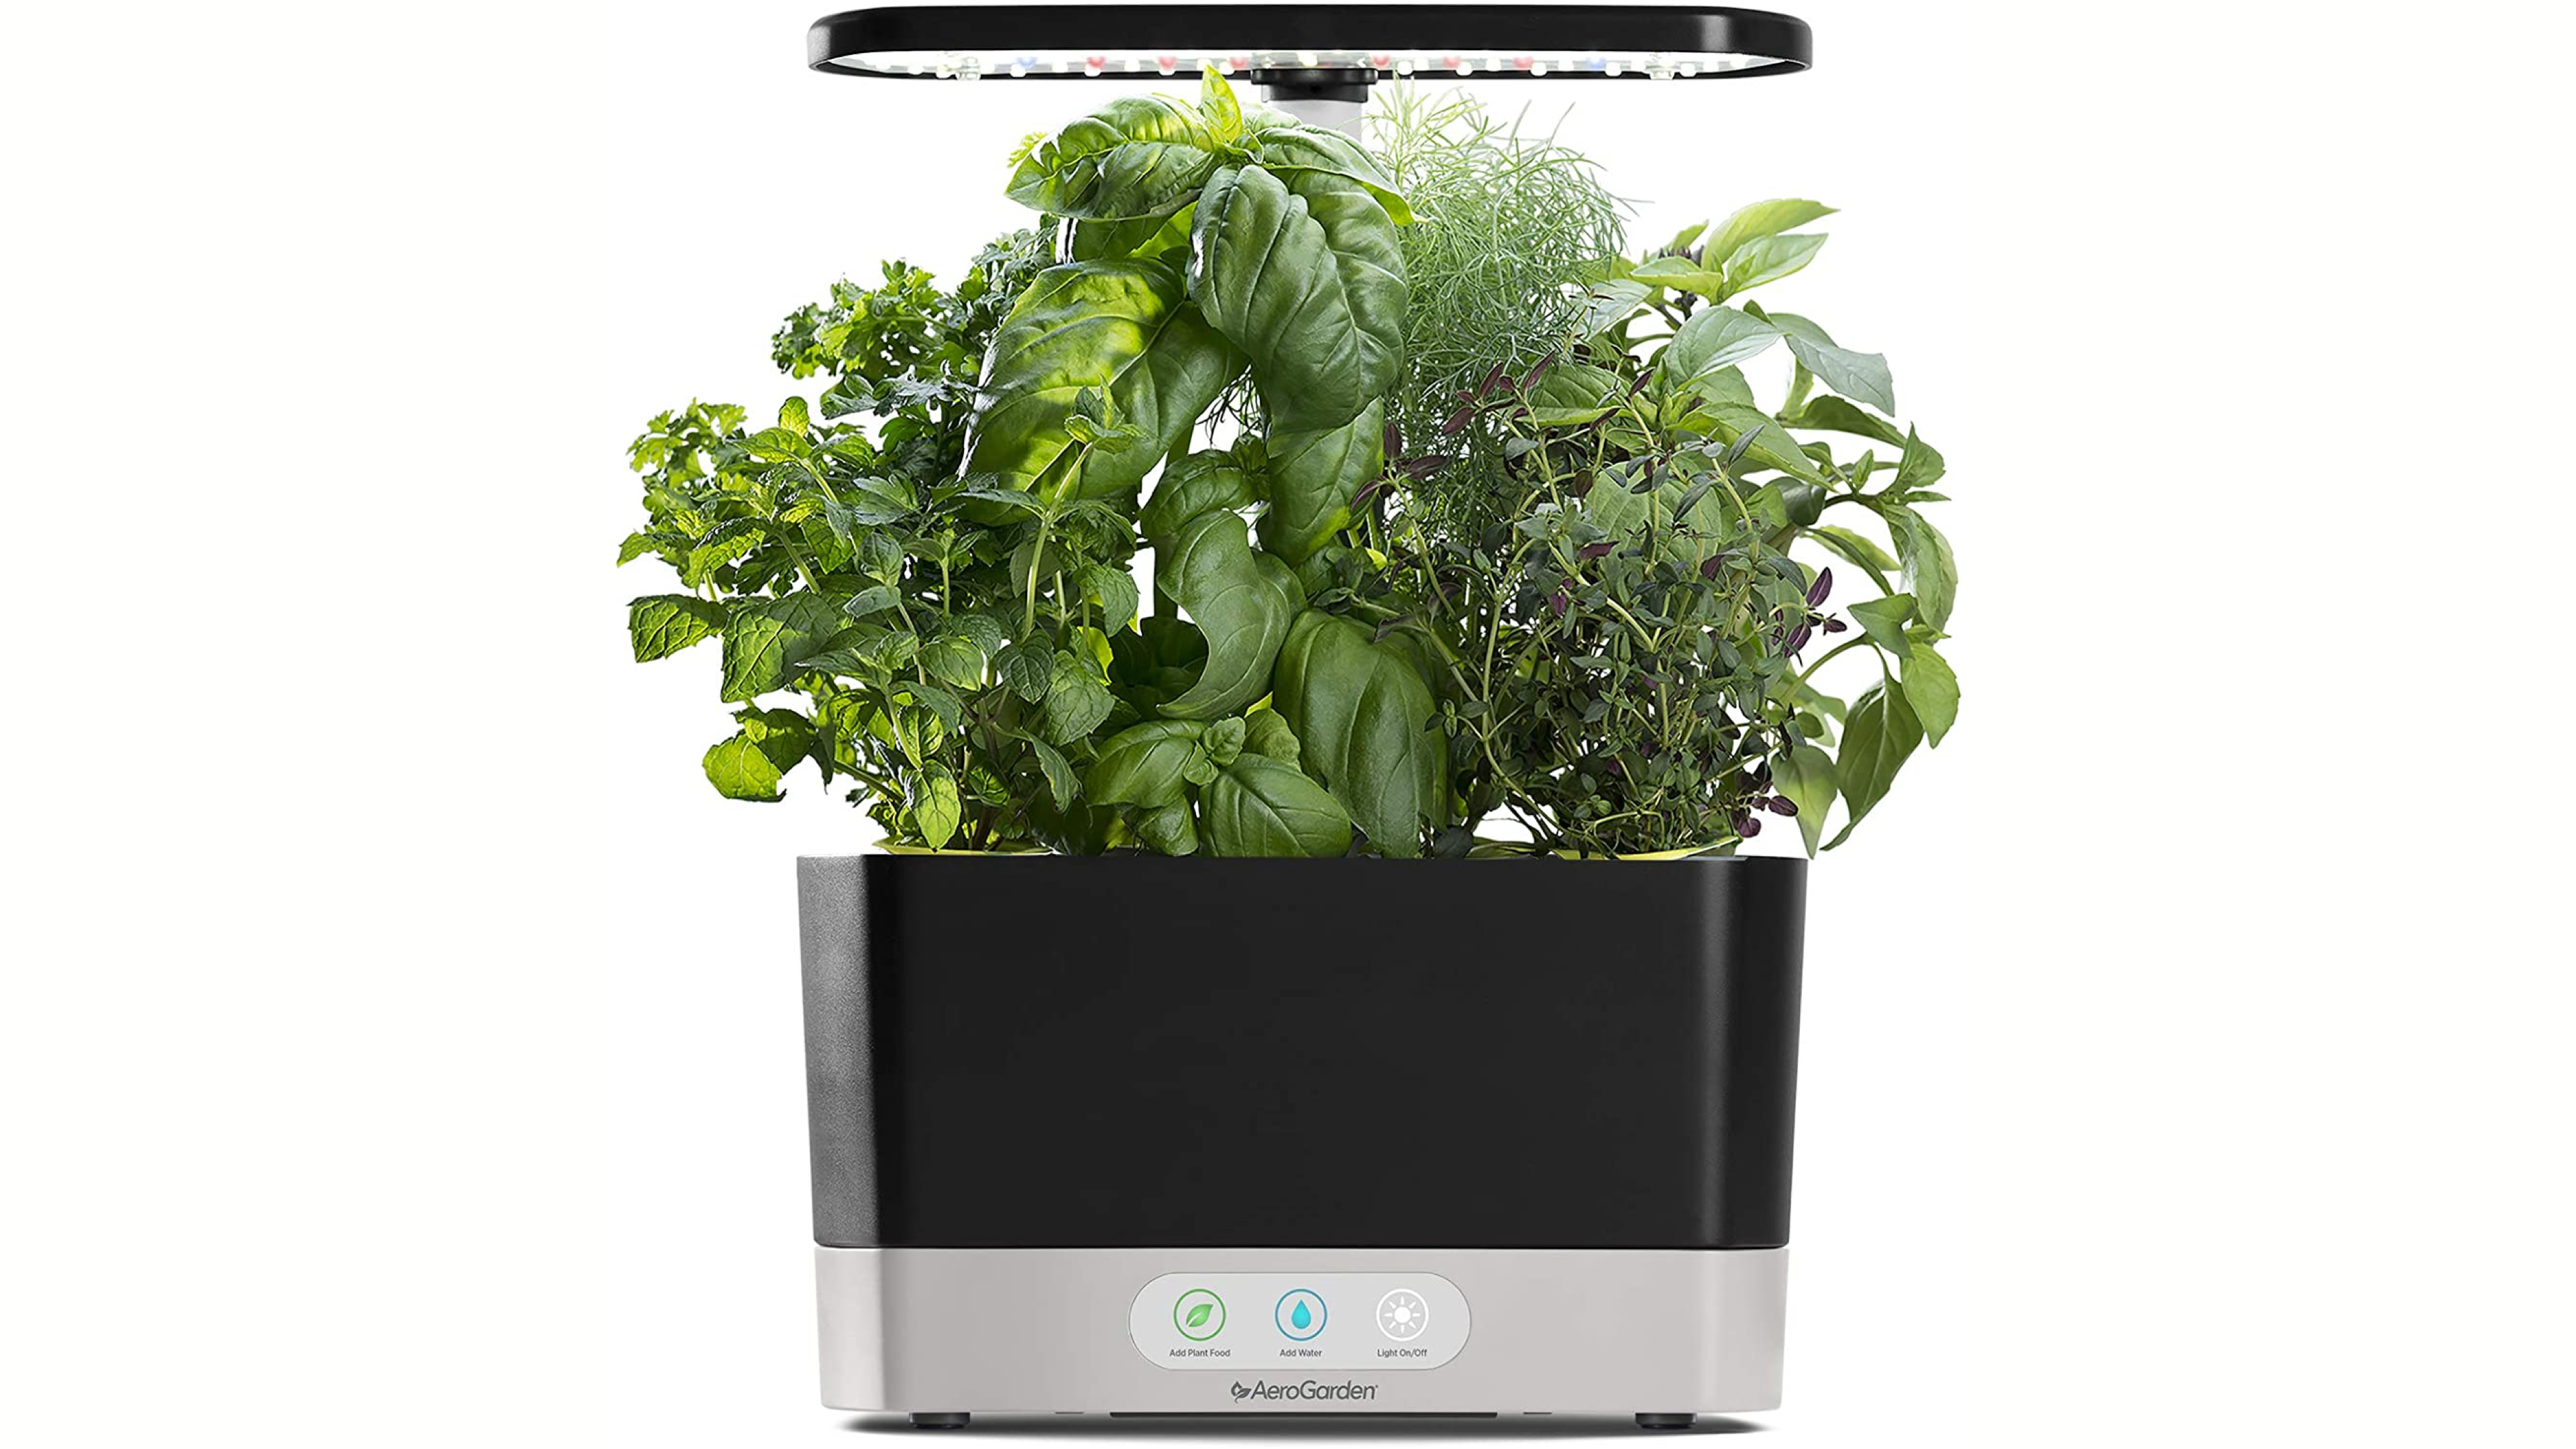 countertop aerogarden to grow herbs and spices in your kitchen